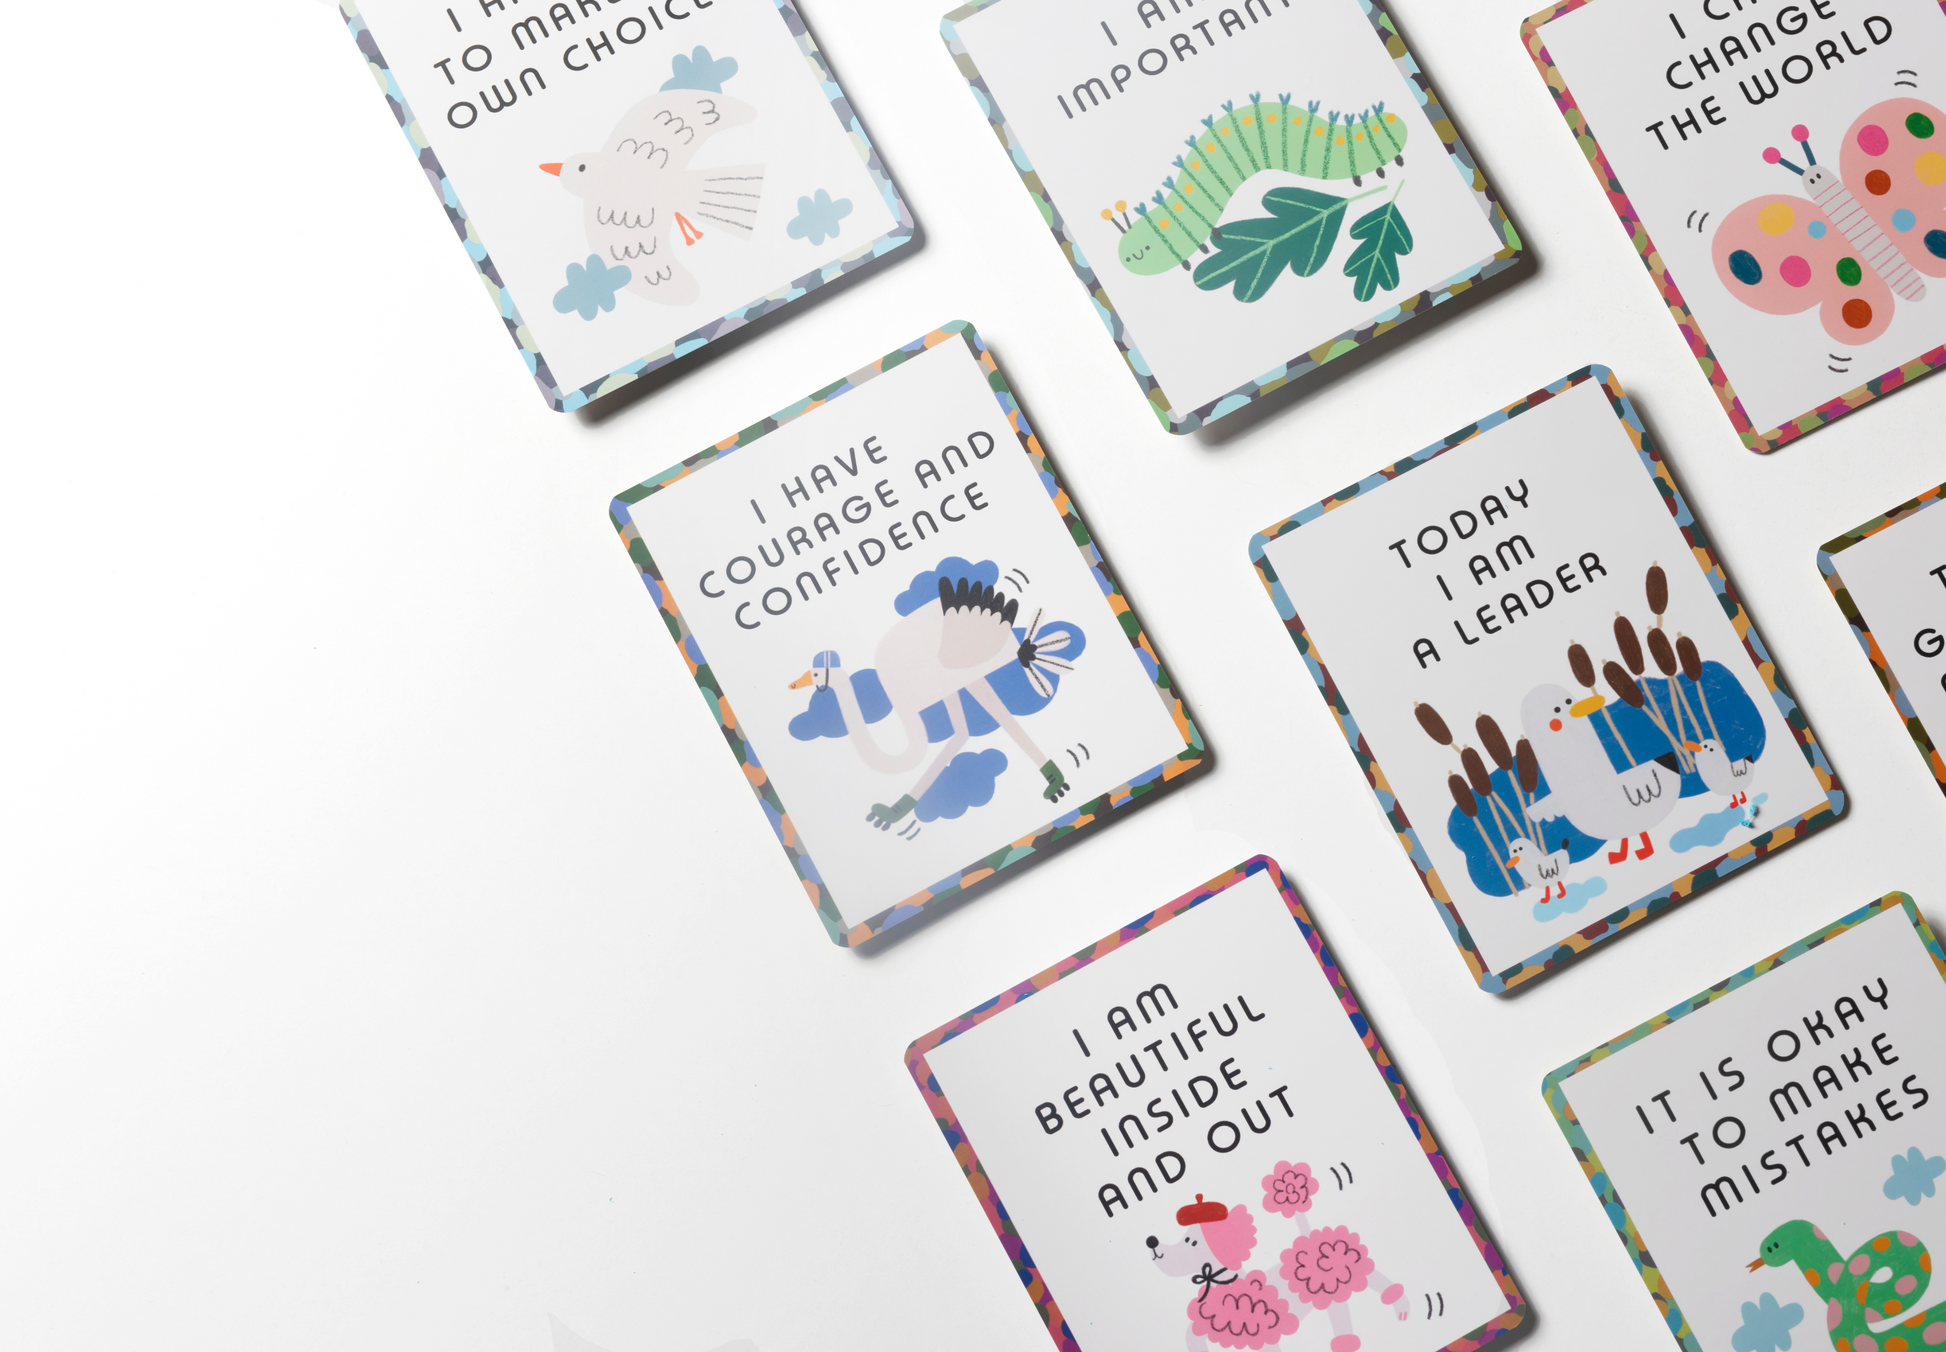  Self Care Affirmations Cards with Display Stand